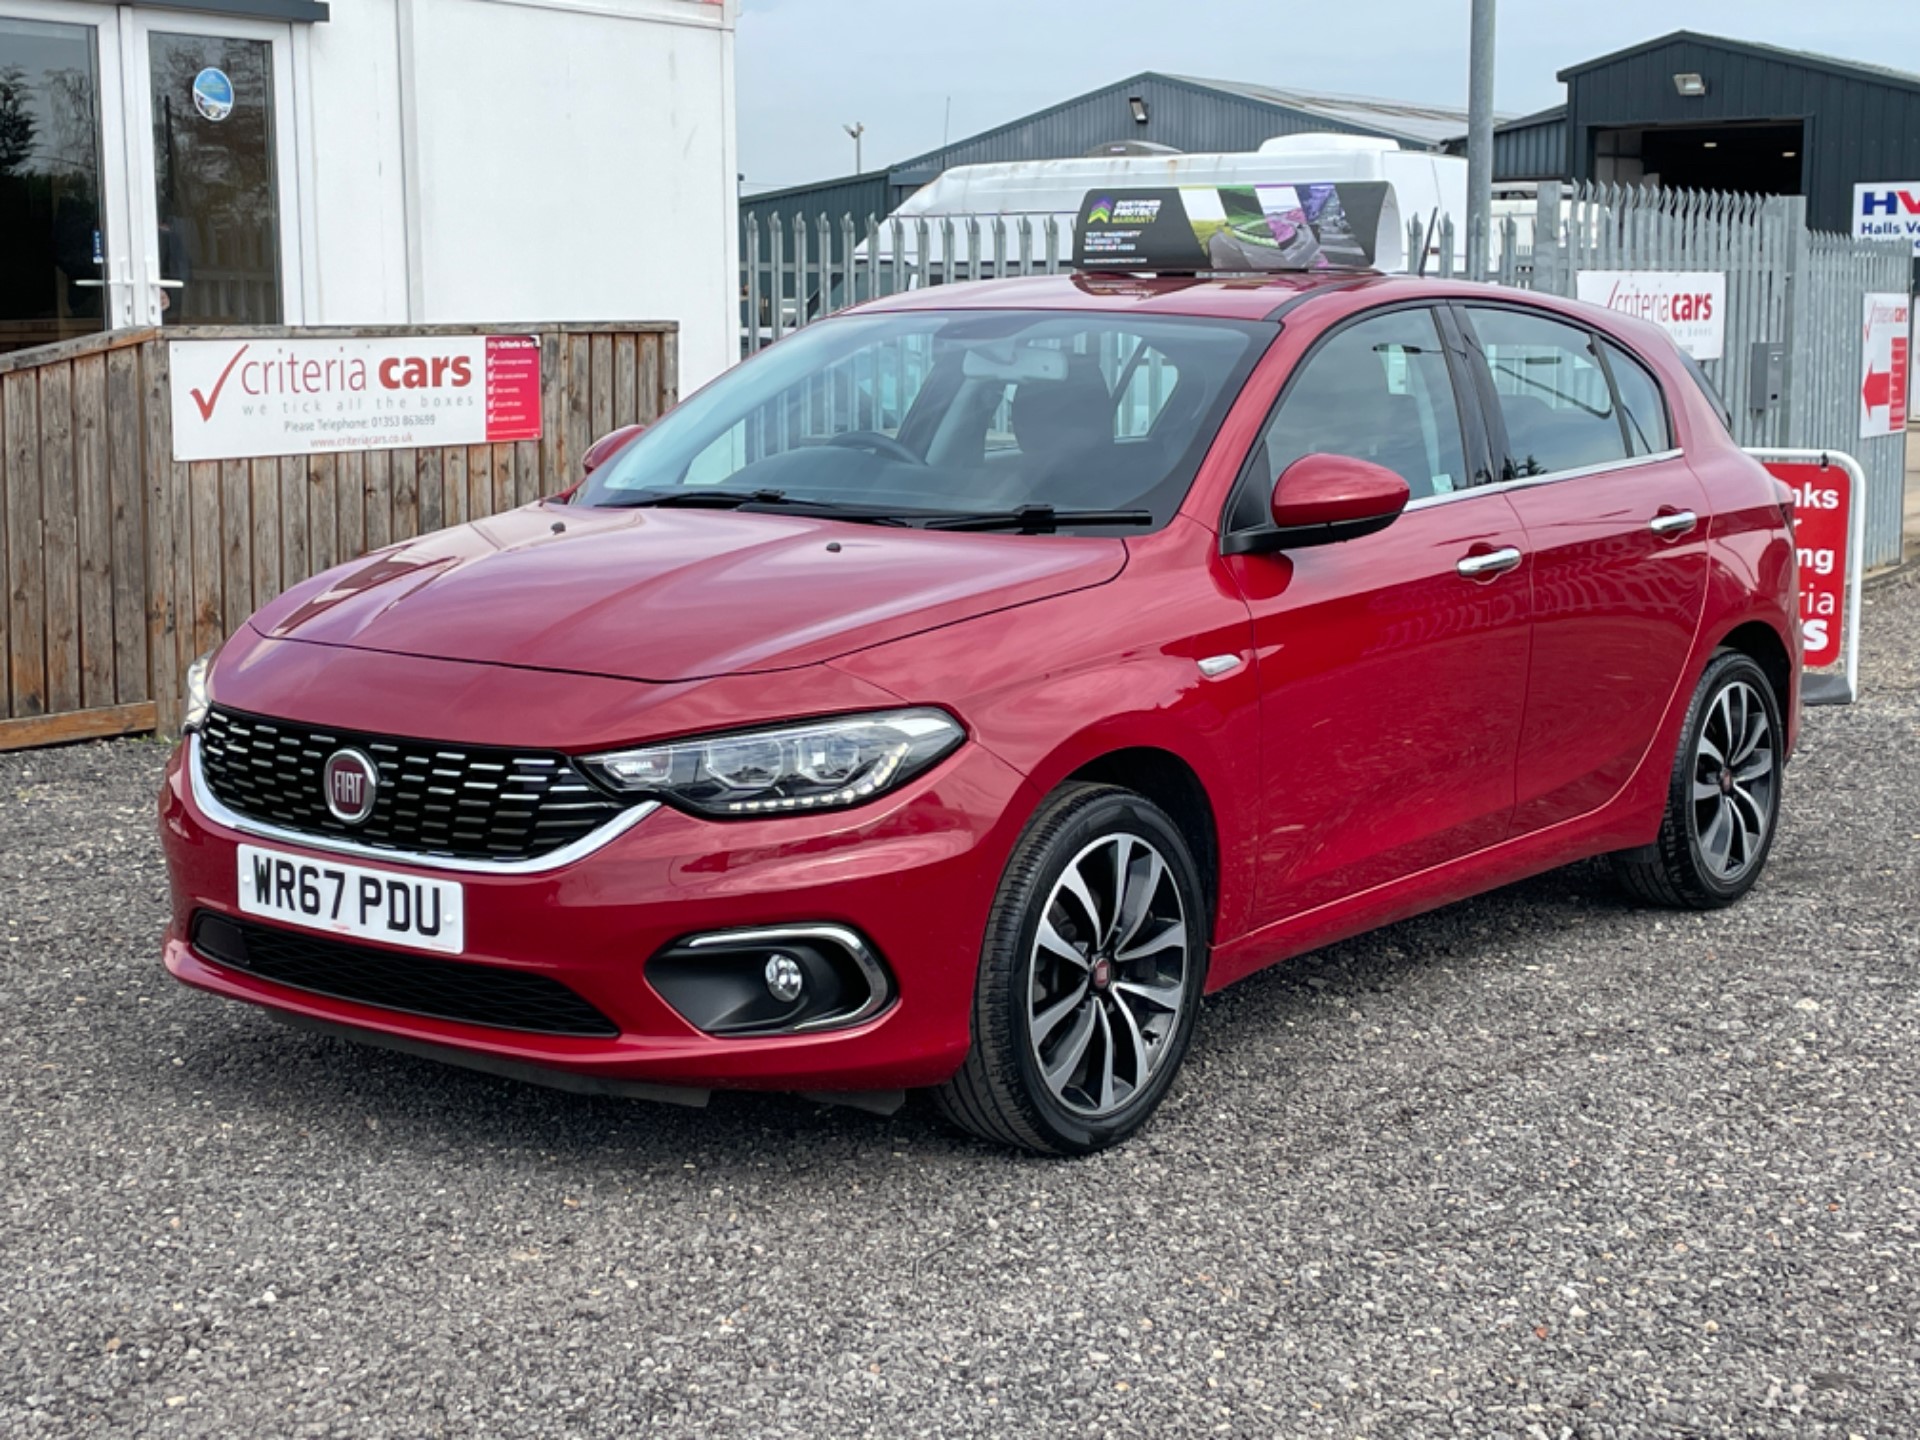 Used Fiat Tipo for sale in Ely, Cambridgeshire